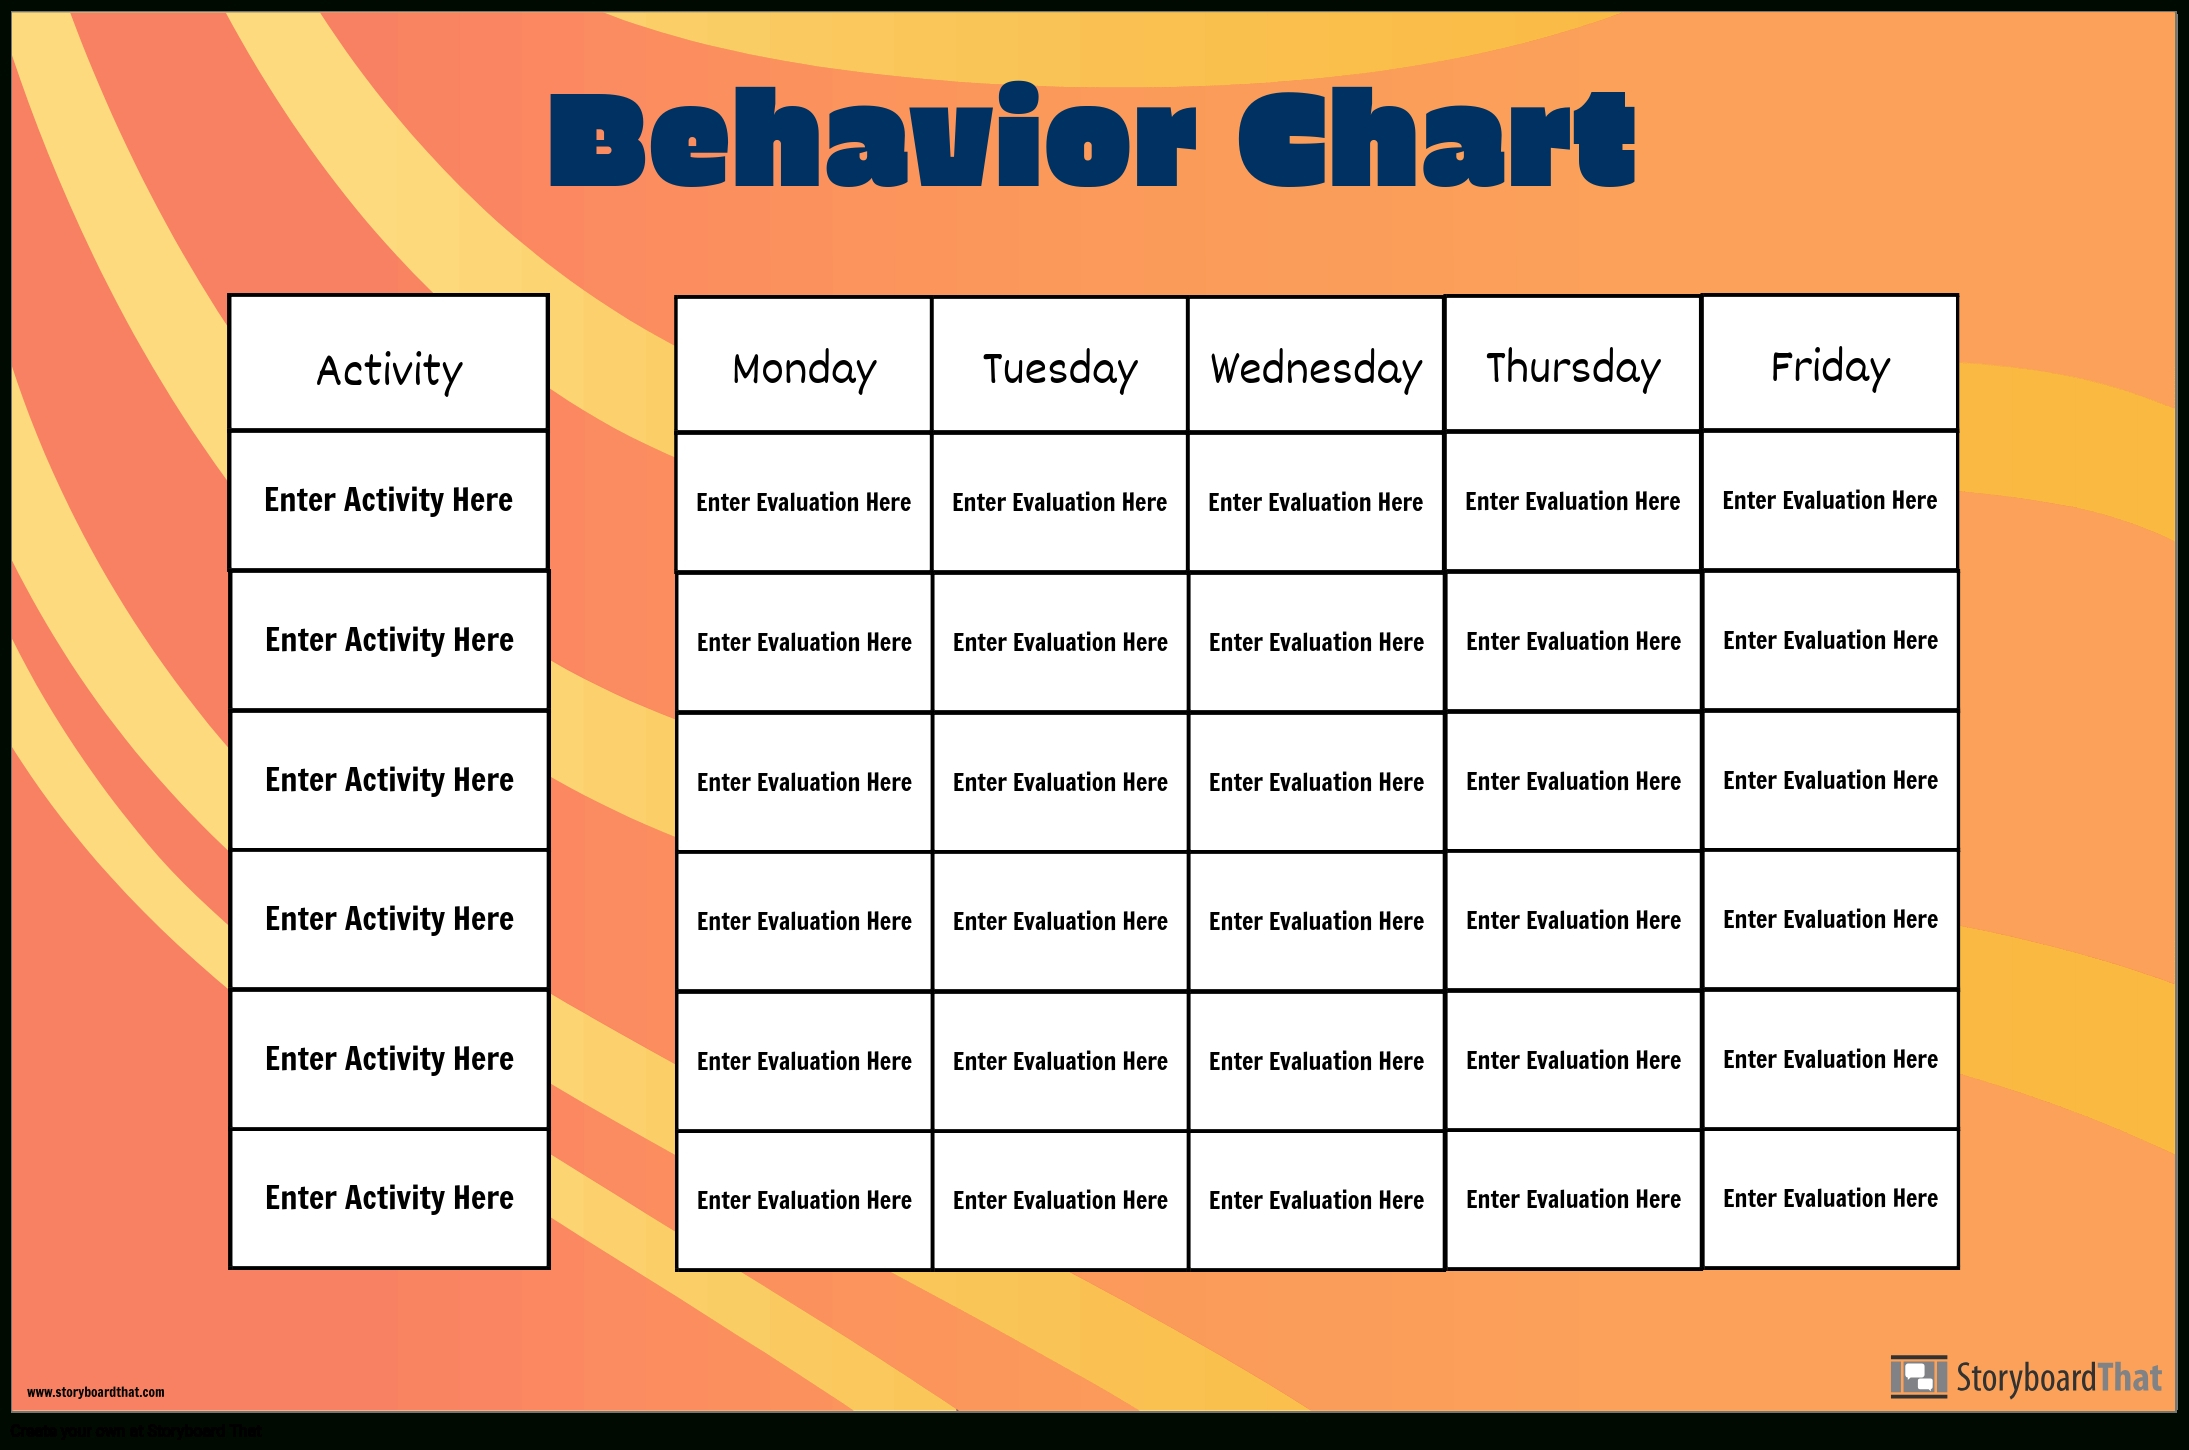 Universal Create A Chart From Monday To Friday | Get Your Calendar regarding Monday To Friday Schedule Chart